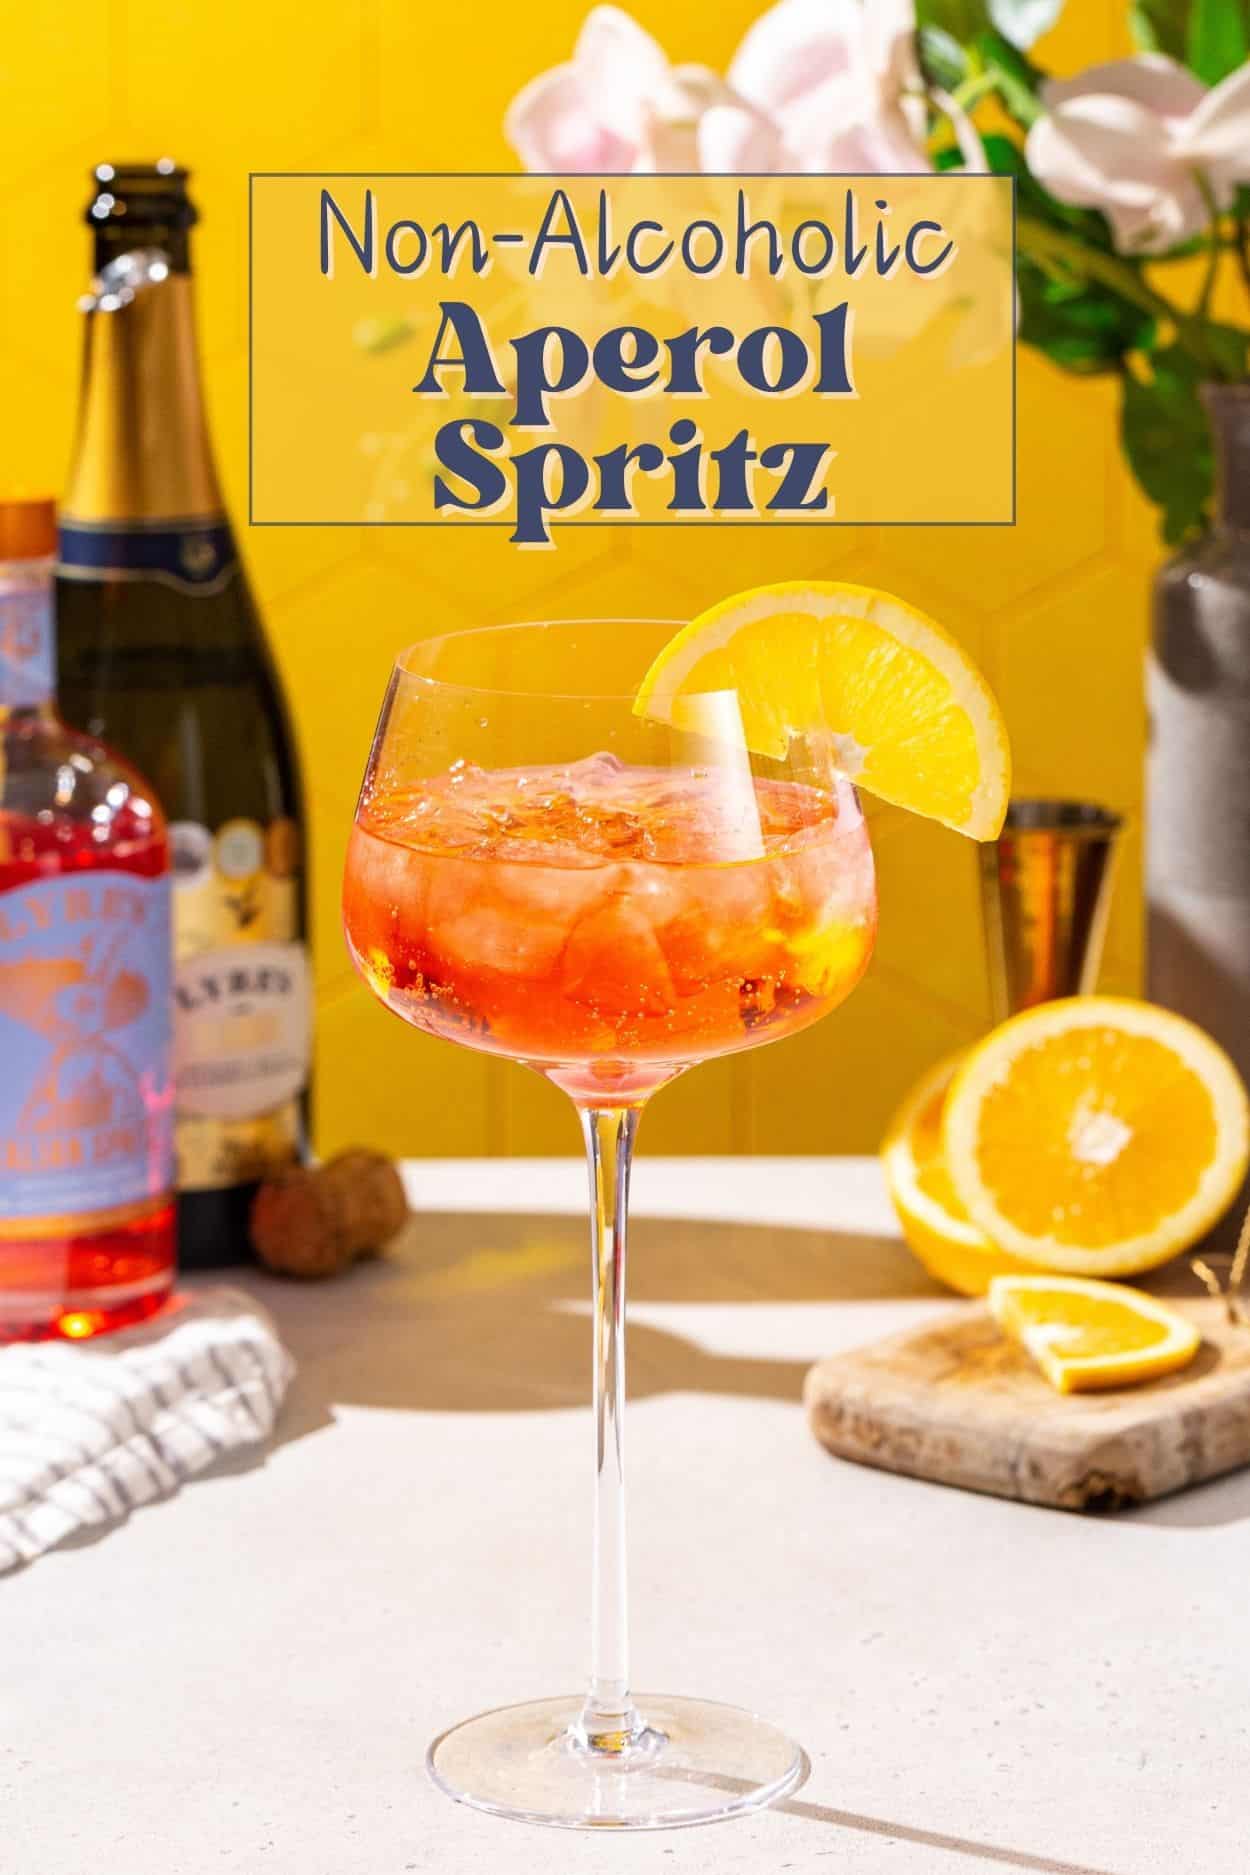 Non-alcoholic Aperol Spritz mocktail on a countertop. In the background are ingredients and flowers invase. Text overlay above the drink says “Non-Alcoholic Aperol Spritz”.